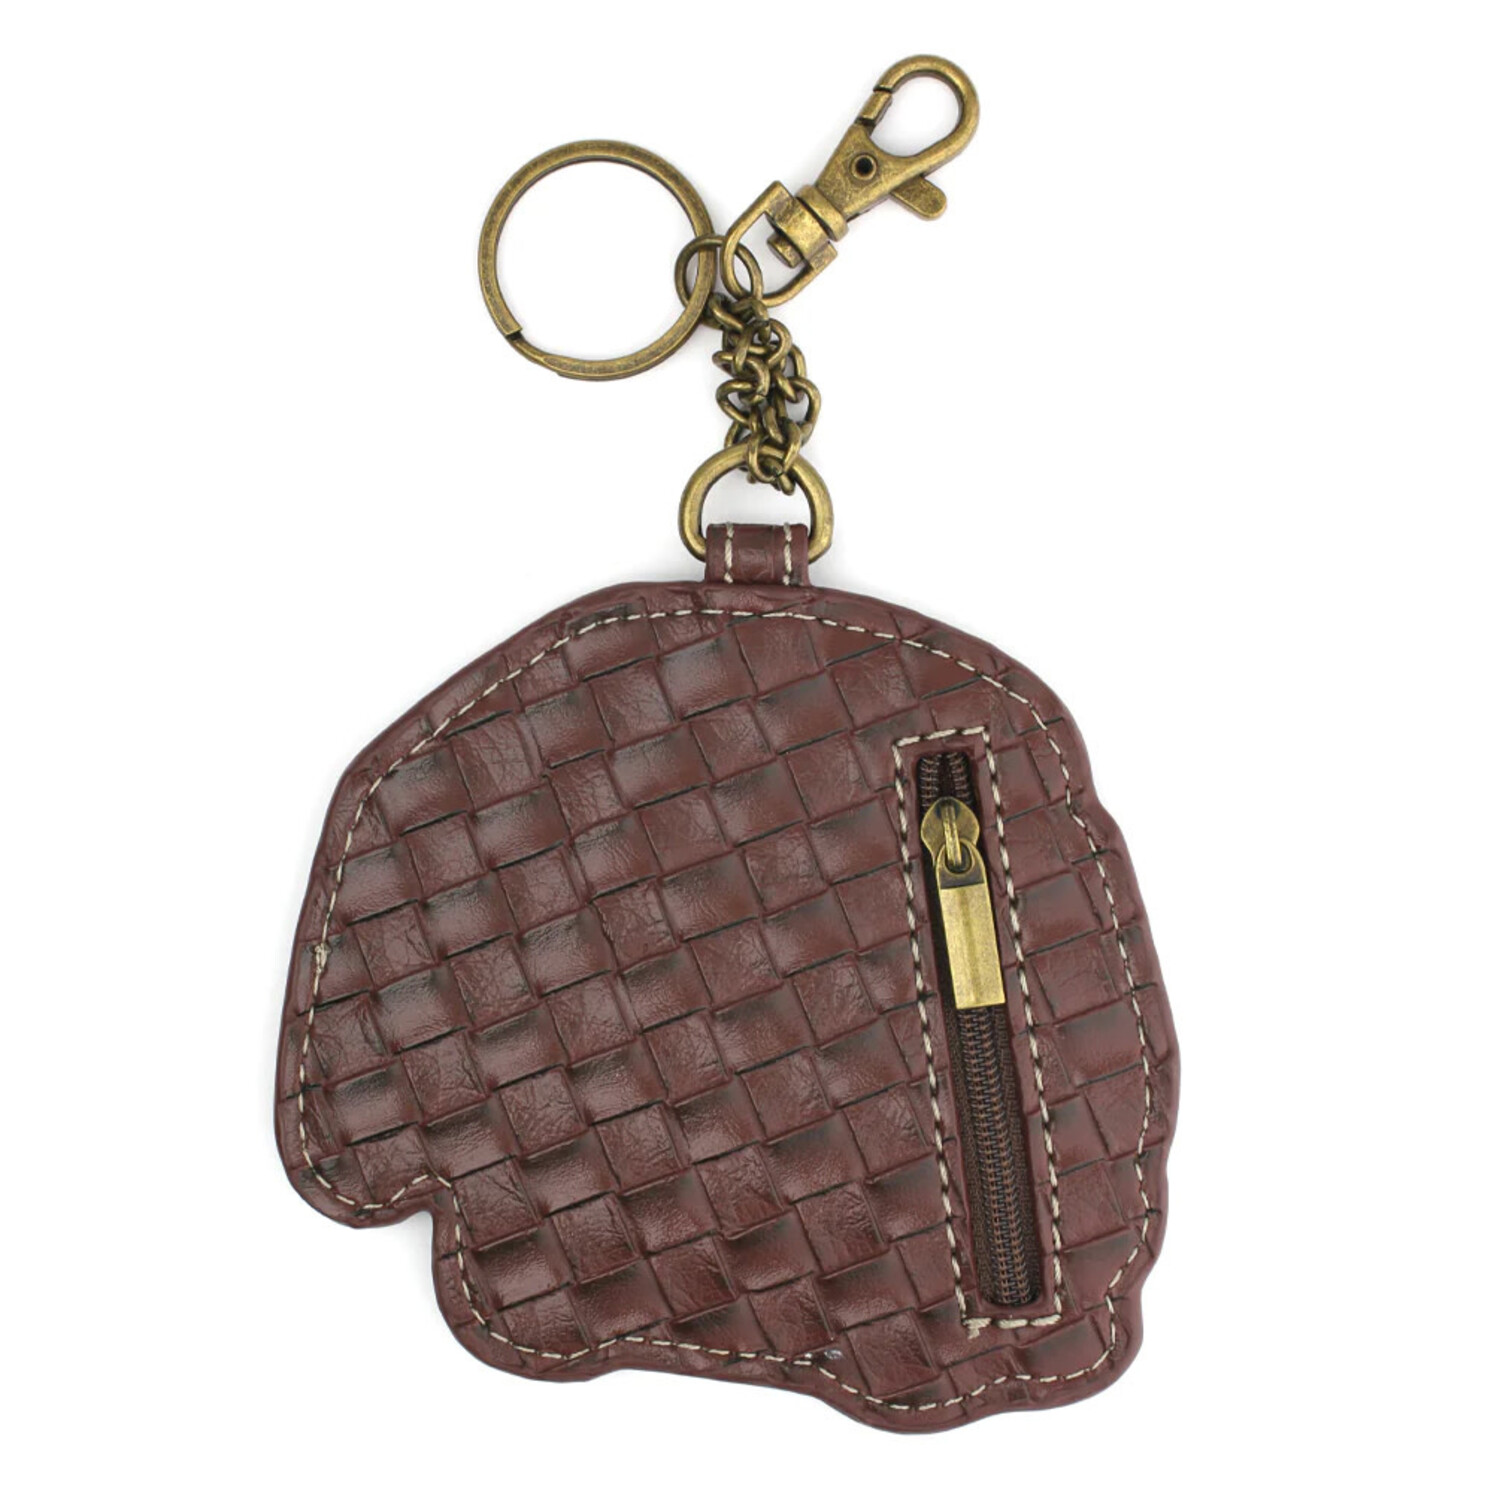 Buffalo Check Coin Keychain Pouch. - Keyring to hold your Keys - Zipper  Closure - Approximately 5.5